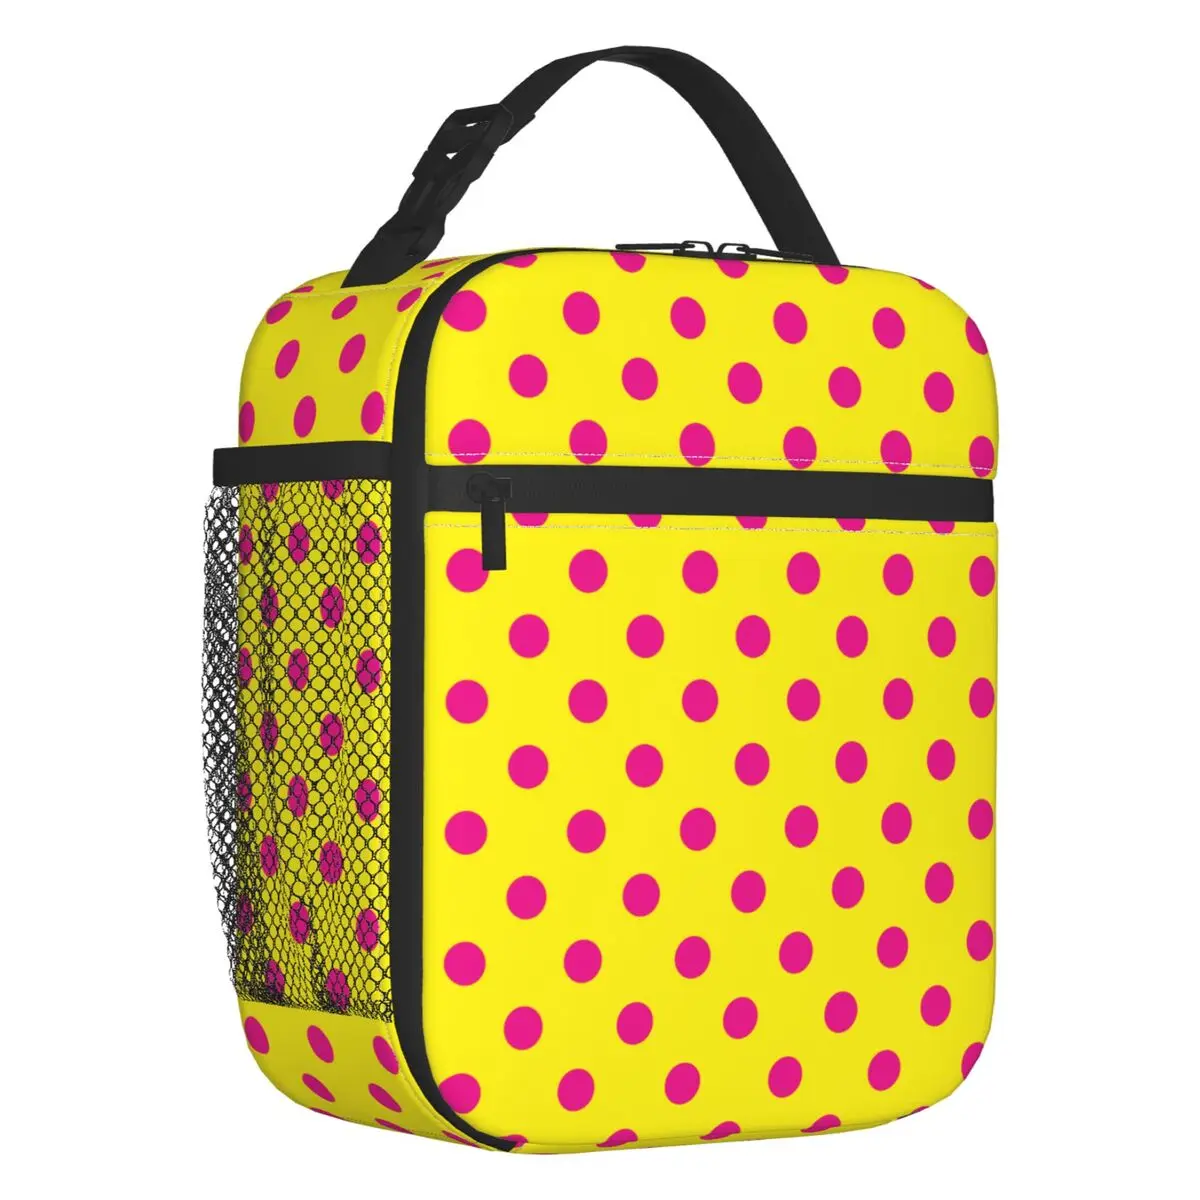 Pink Polka Dots On Yellow Pattern Insulated Lunch Bag for Women Leakproof Cooler Thermal Lunch Tote Kids School Children